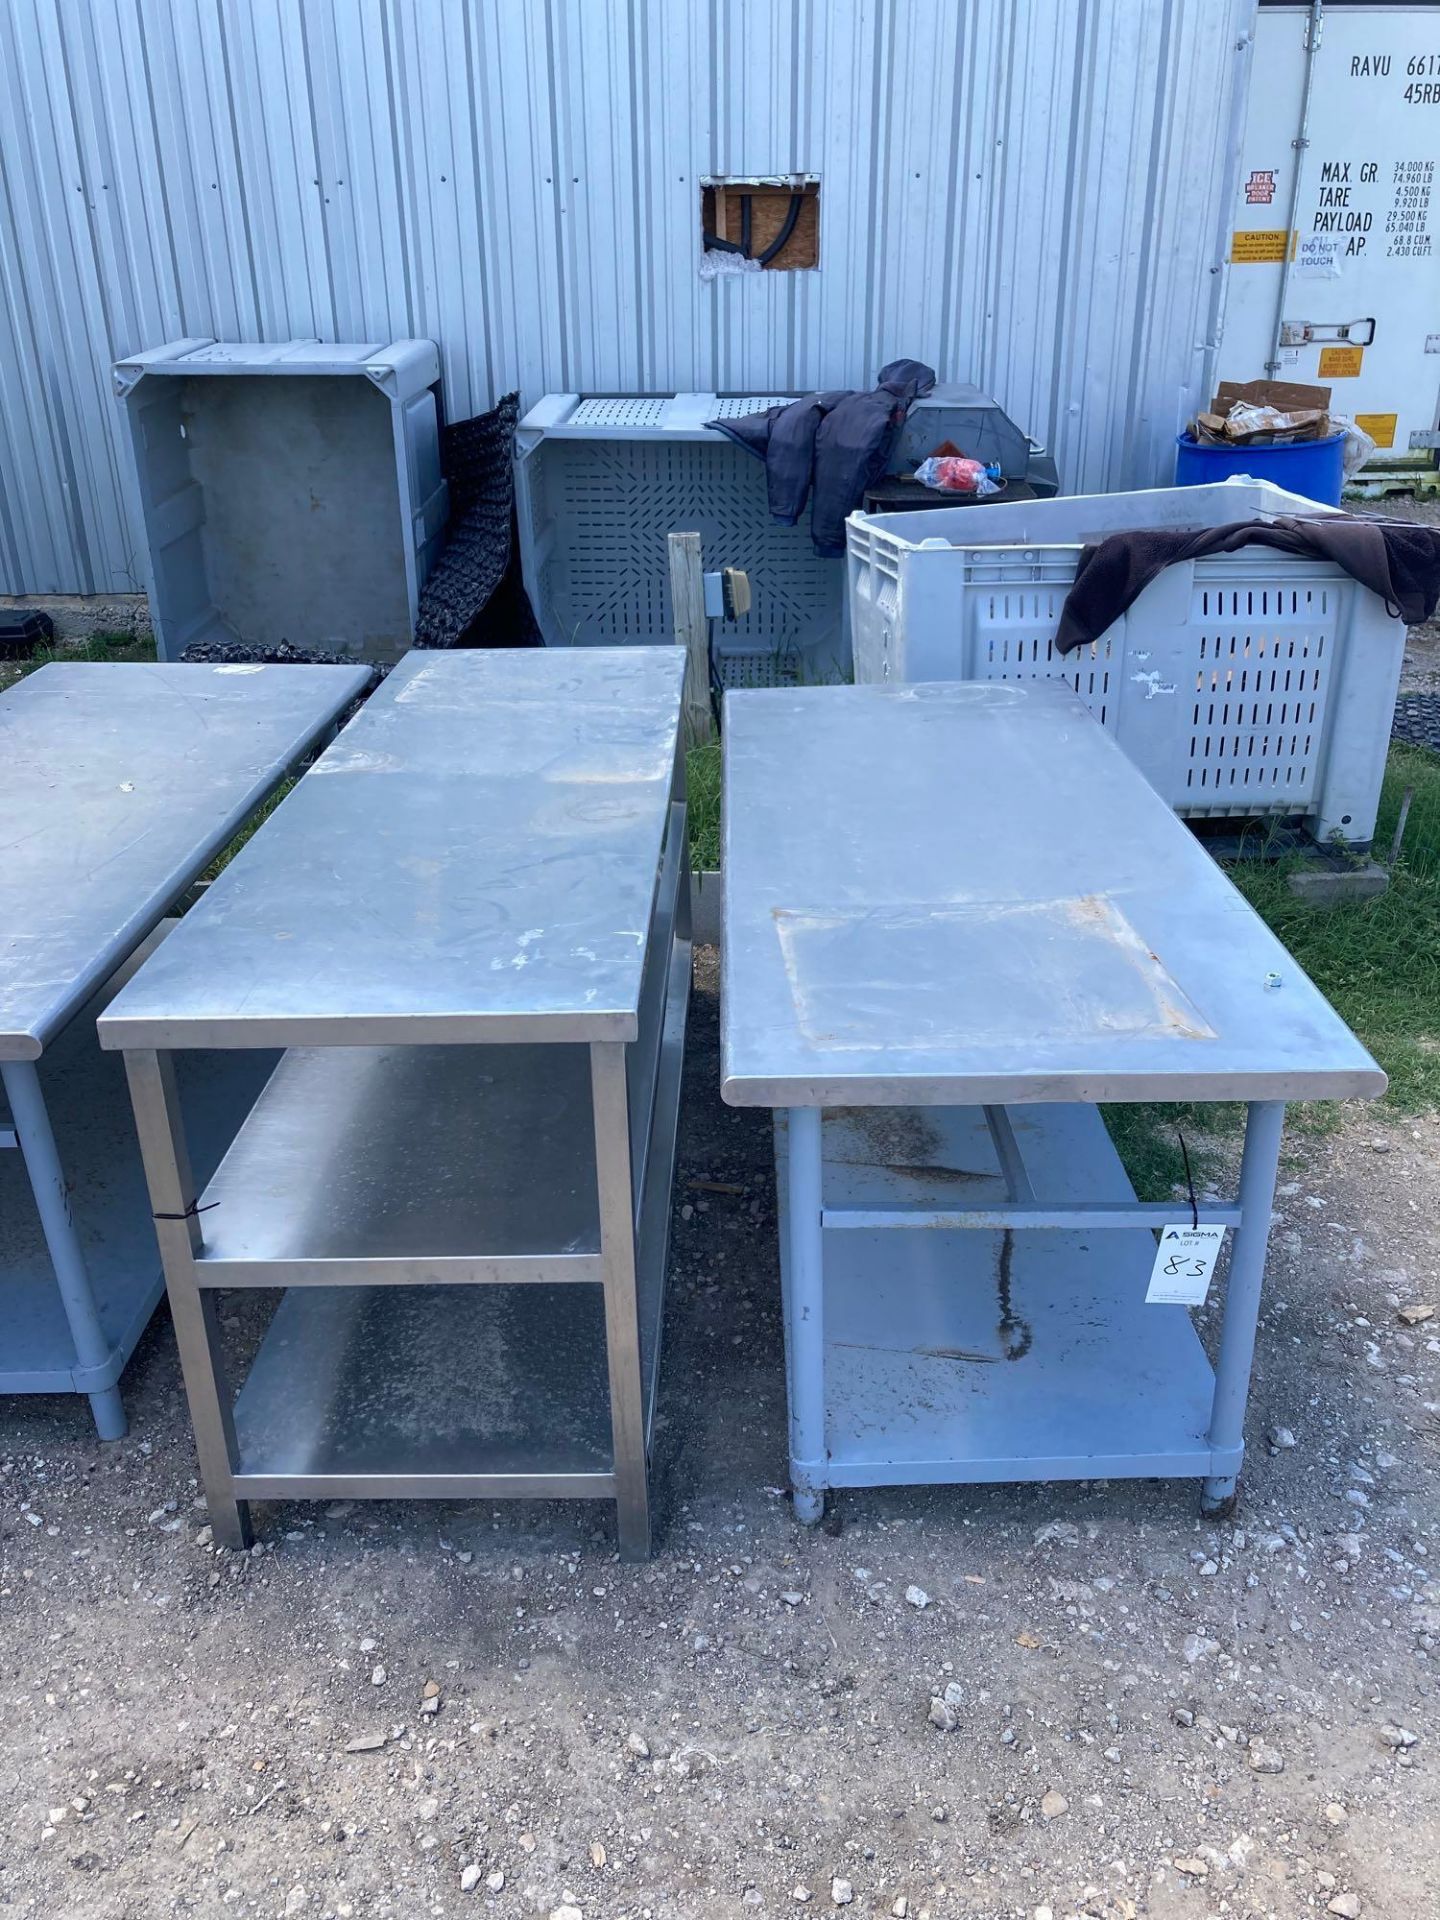 2 Stainless Steel Tables